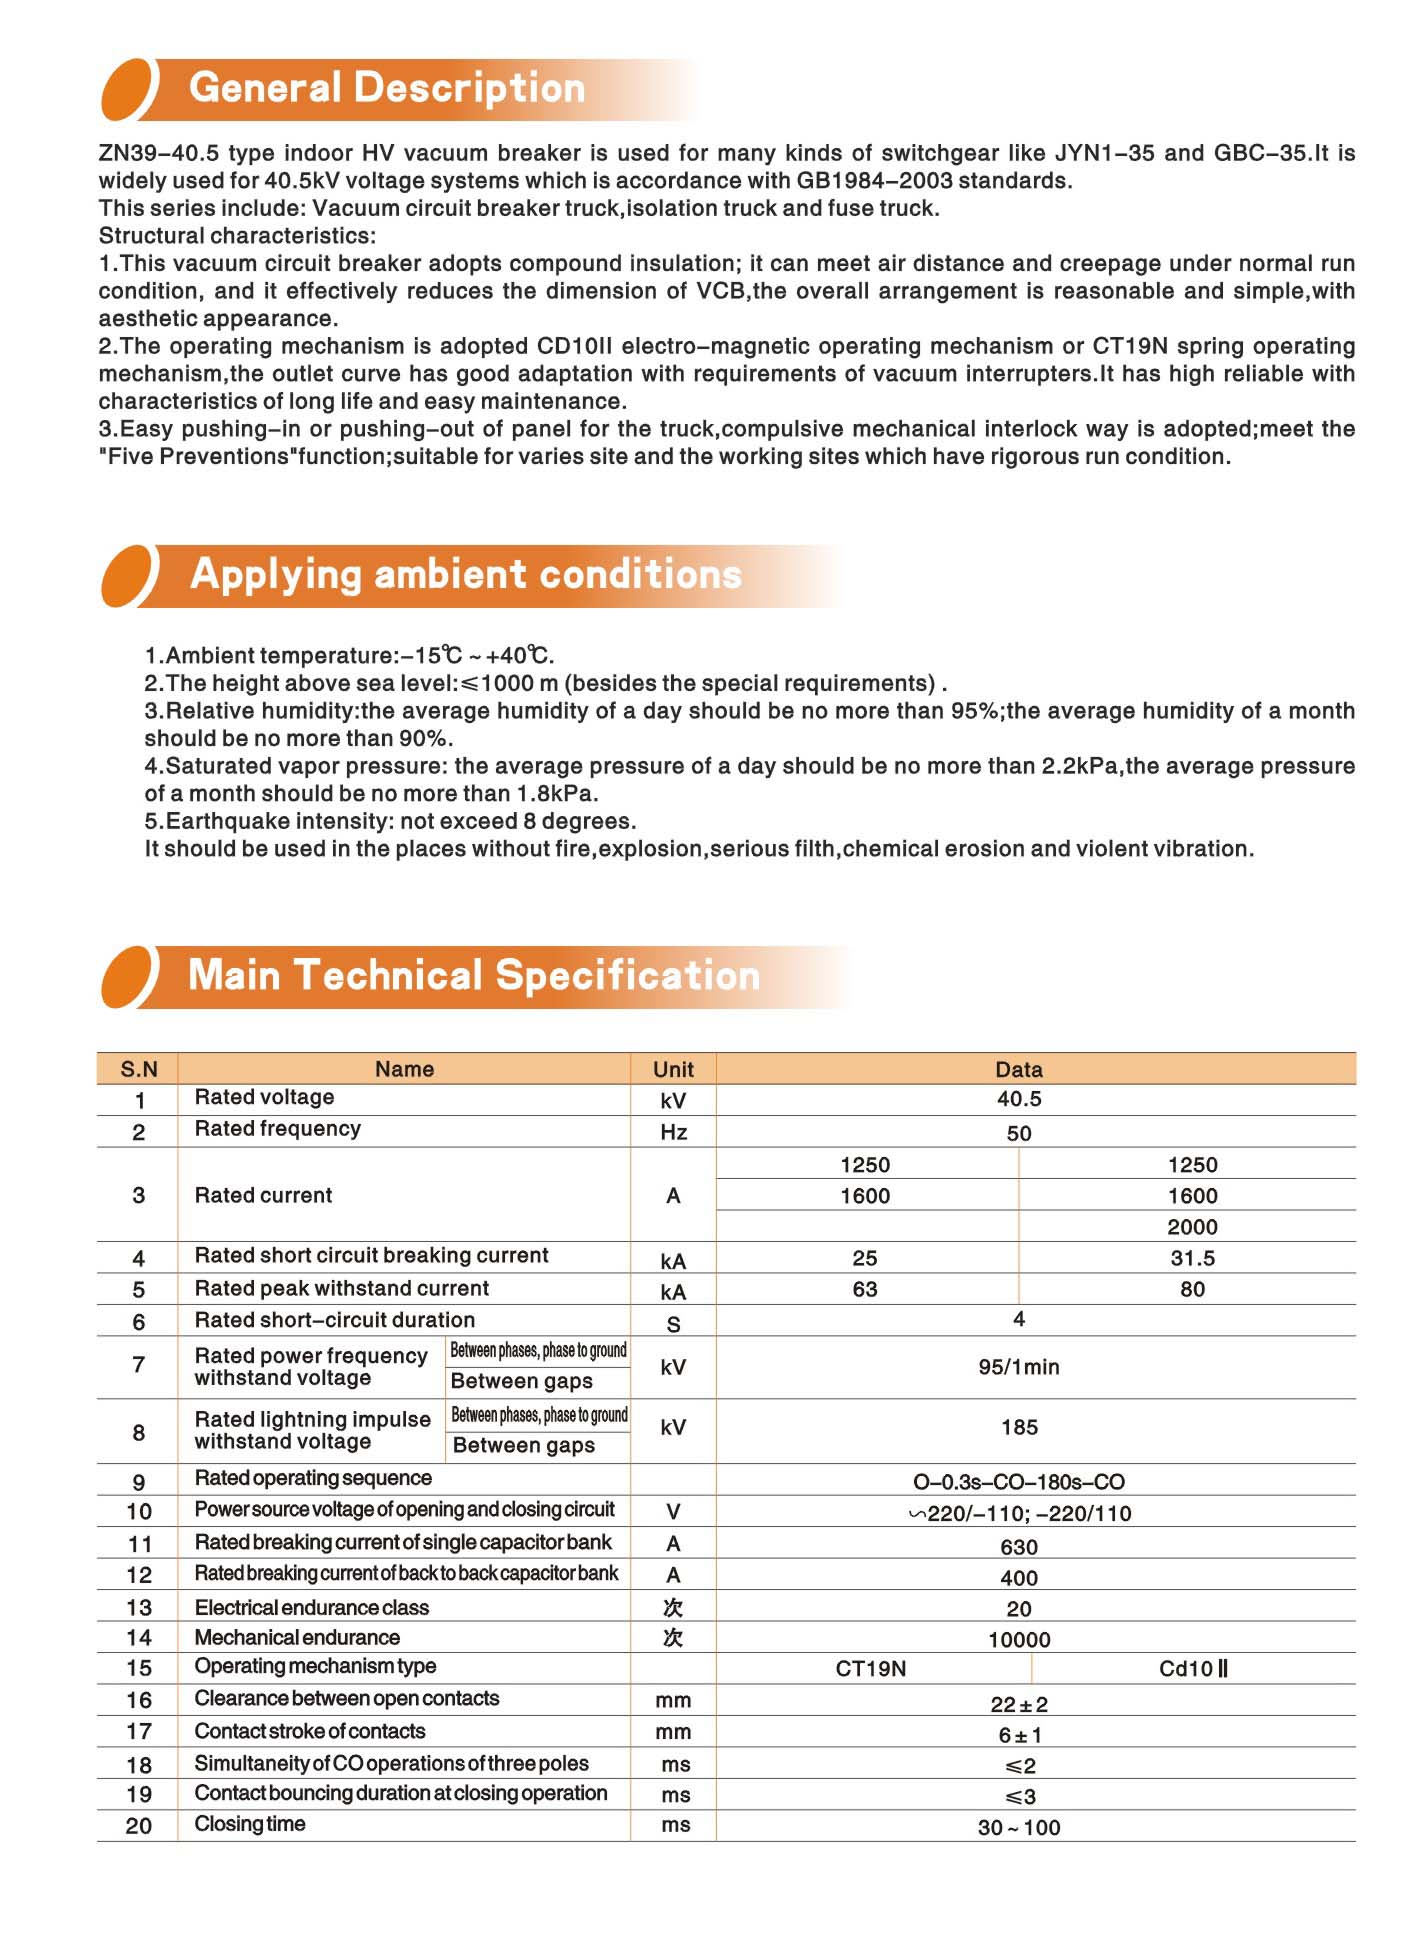 ZN39-40.5 type VCB Technical Specification